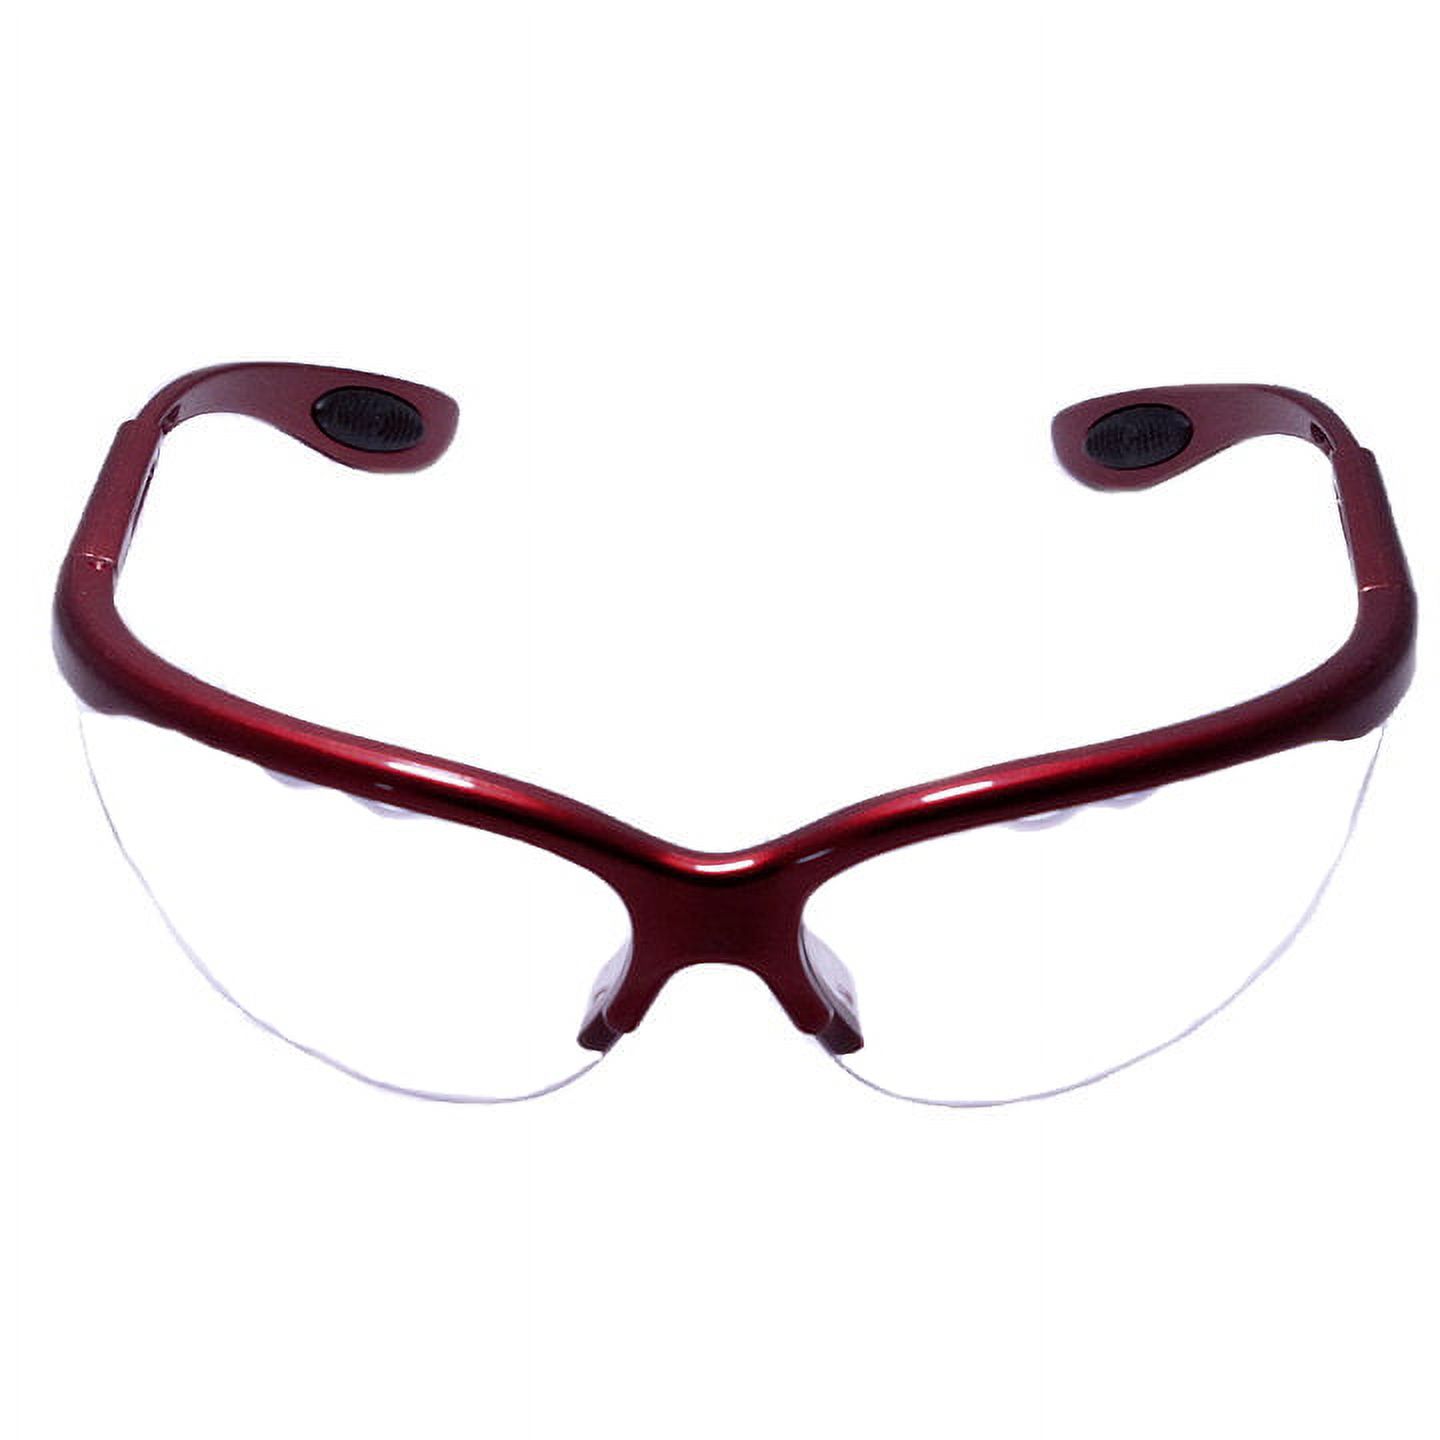 Python Xtreme View Protective Racquetball Eyeguard (Eyewear) (Red) - image 1 of 3